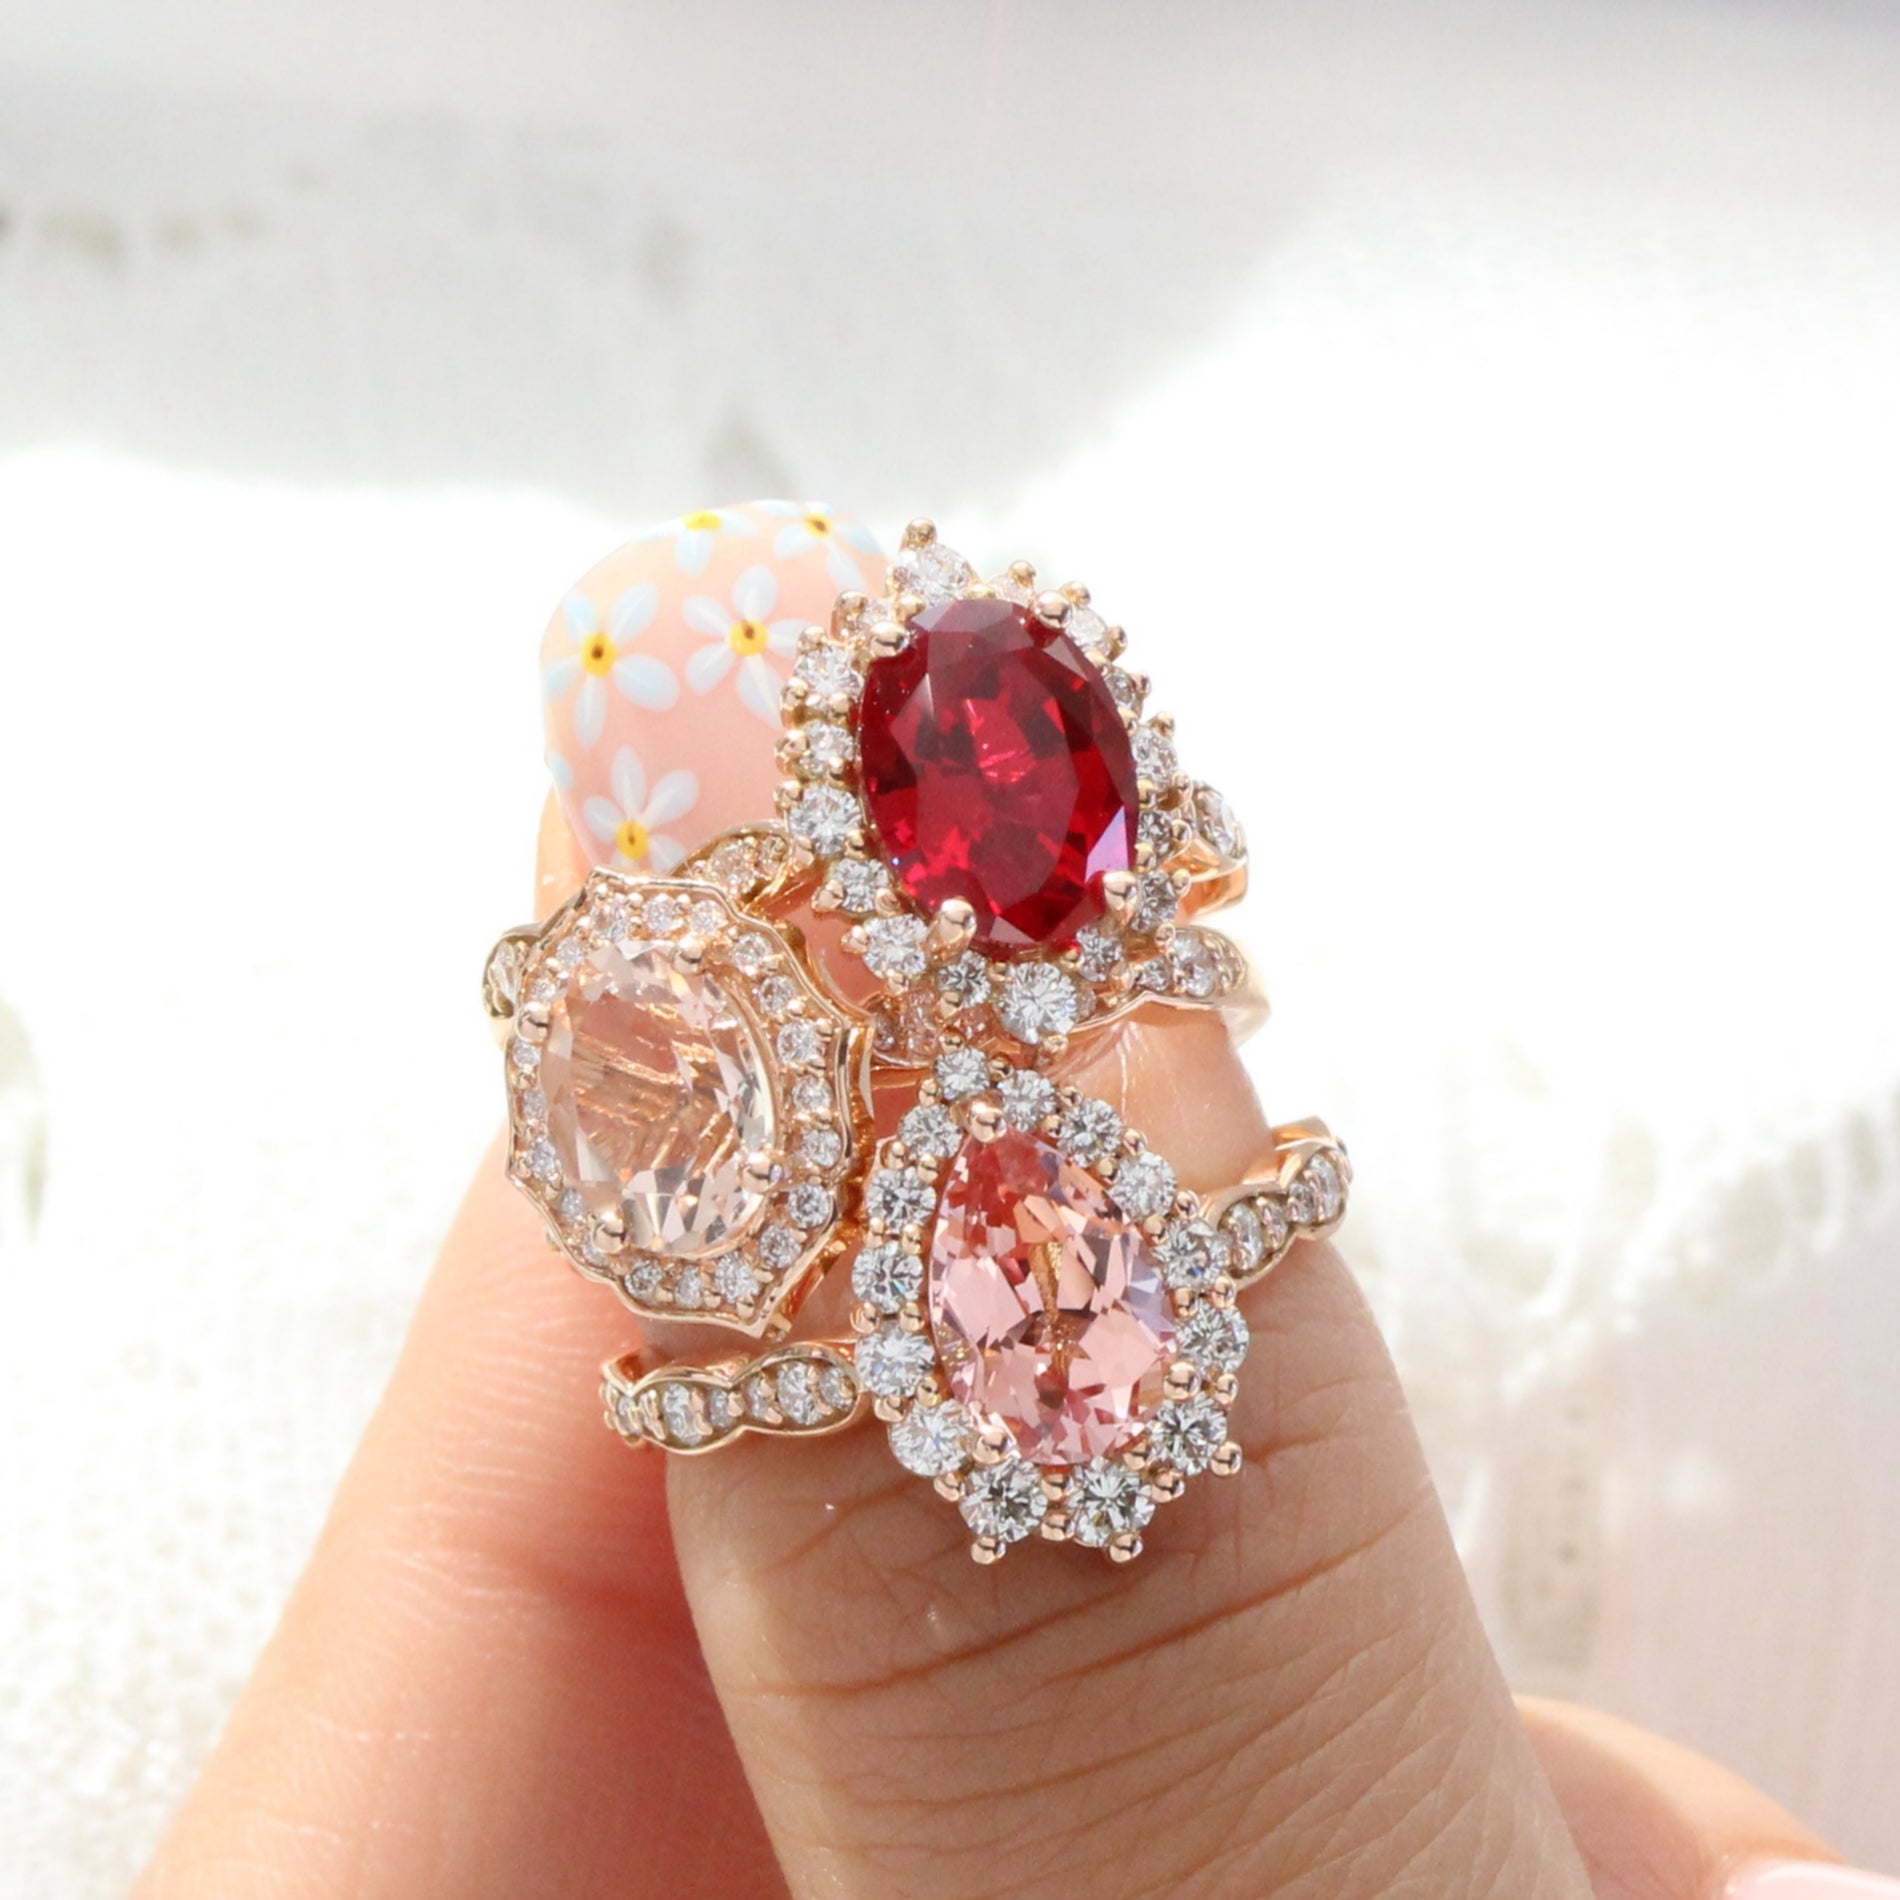 Engagement Rings Inspired by the 2023 Viva Magenta Color Trend La More Design Jewelry